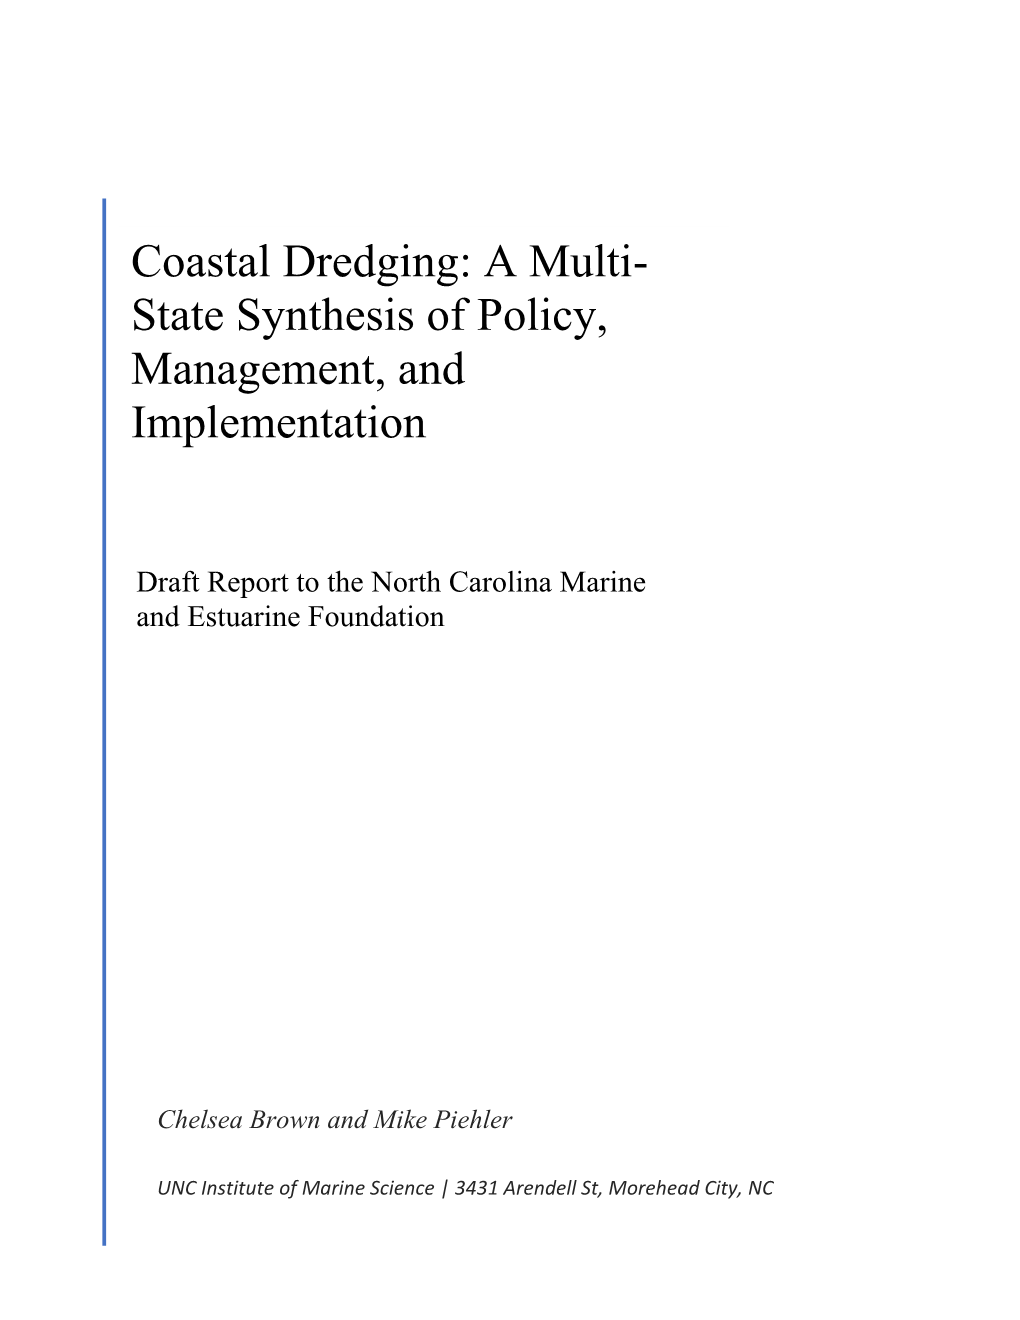 Coastal Dredging: a Multi-State Synthesis of Policy, Management, and Implementation